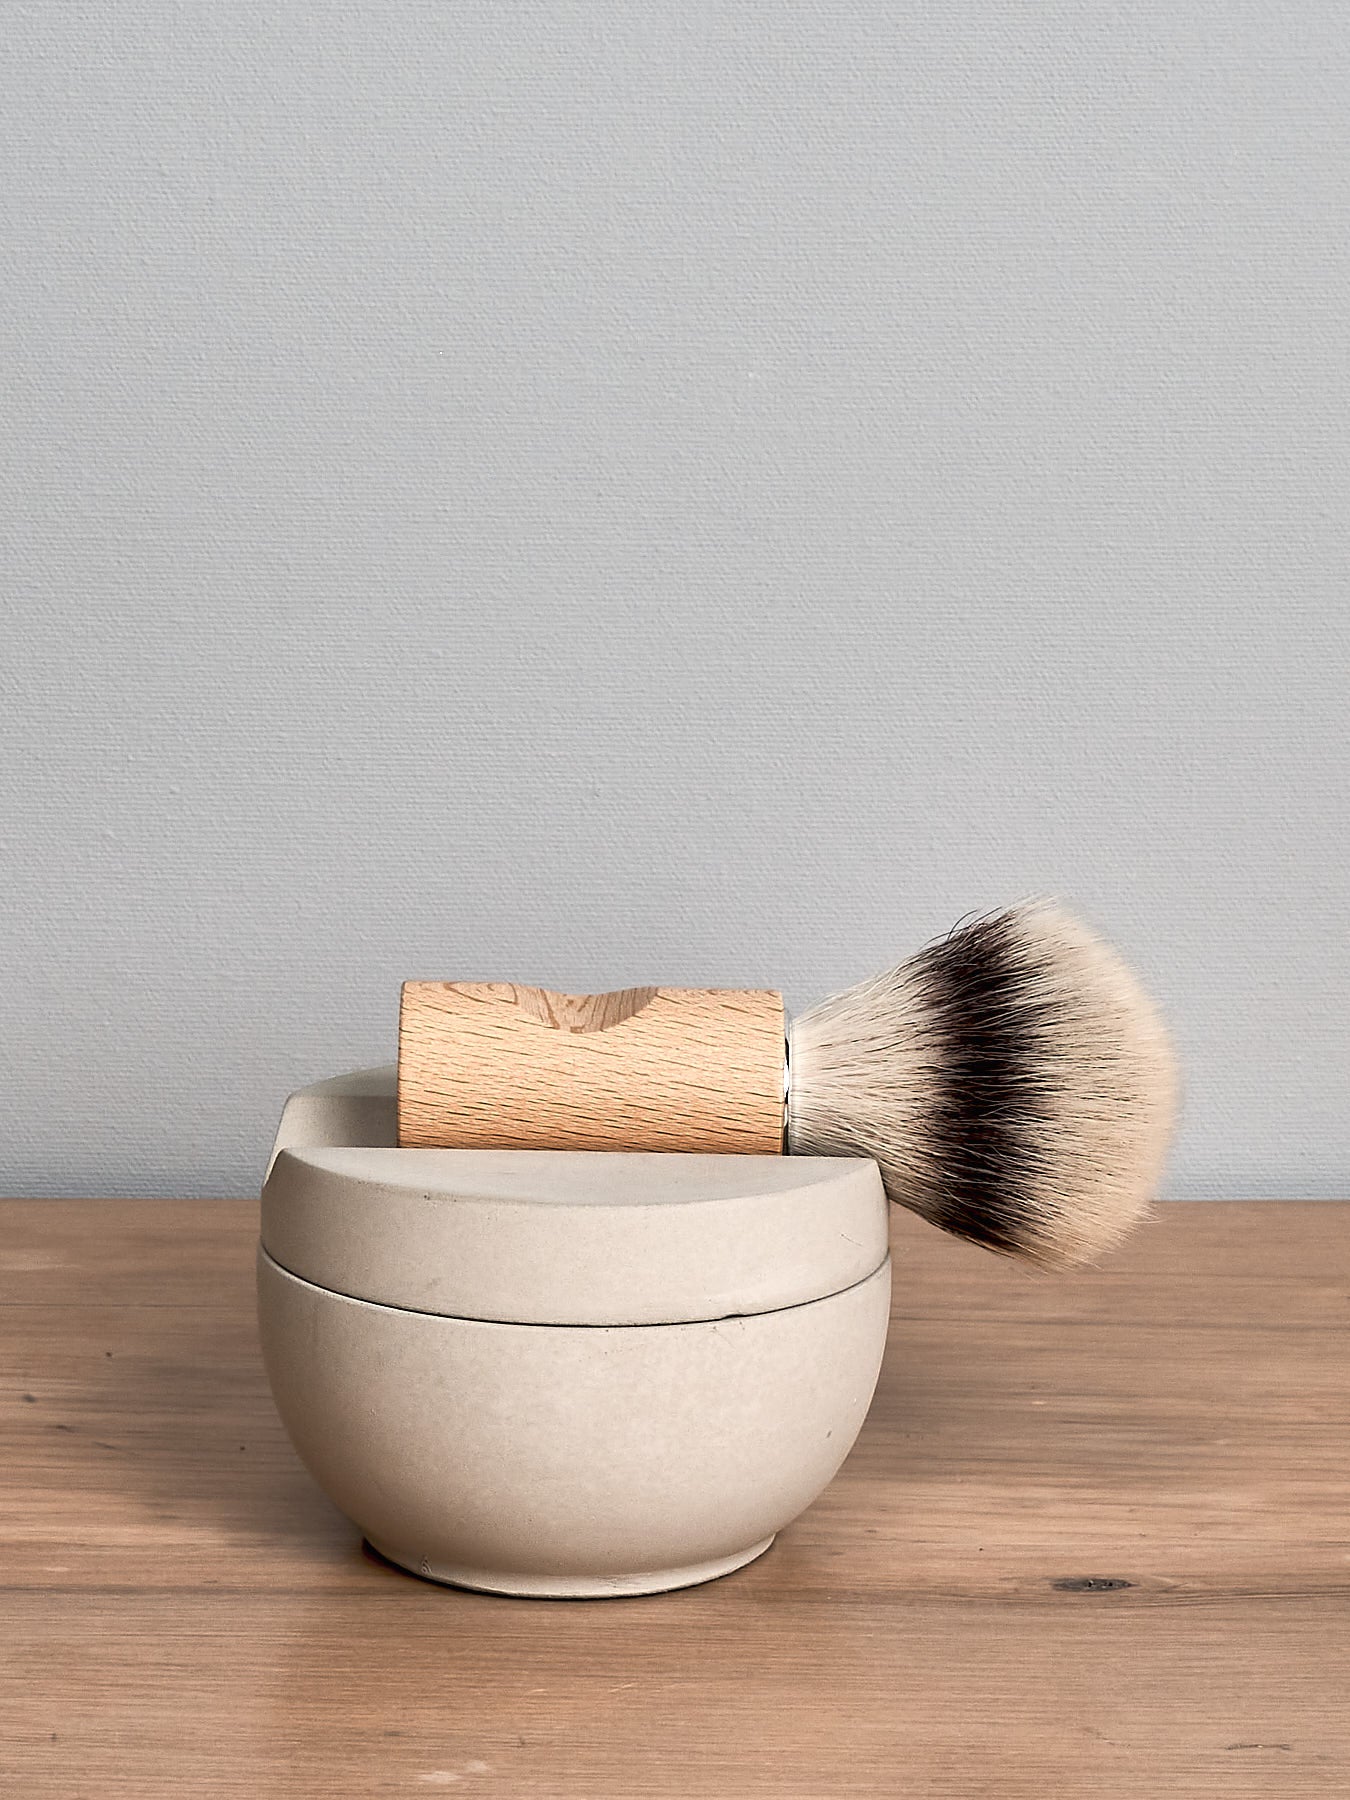 An Iris Hantverk Shaving Brush & Cup with Cedarwood Soap sits on top of a wooden bowl.